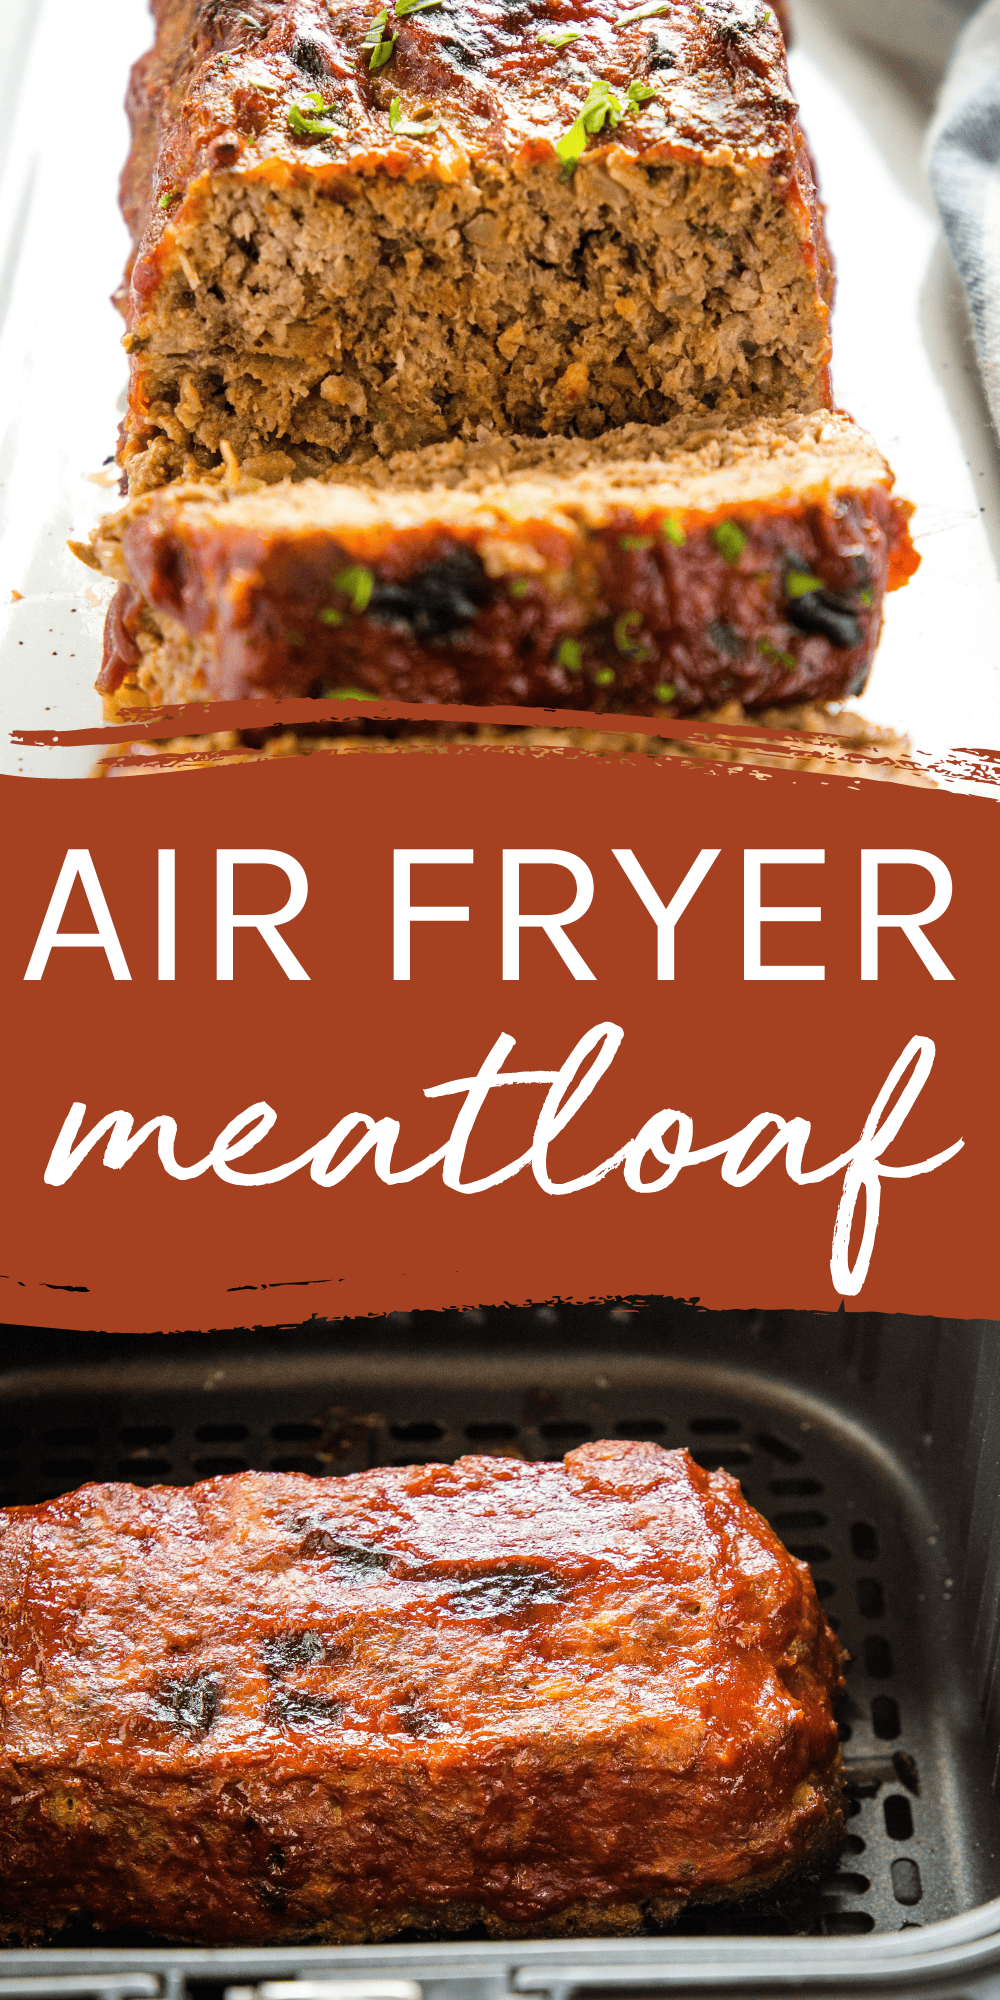 This Air Fryer Meatloaf recipe is an easy comfort food meal idea that's deliciously juicy, perfectly cooked, and budget-friendly! The BEST meatloaf recipe made in the air fryer or the oven. Recipe from thebusybaker.ca! #meatloaf #airfryermeatloaf #easymeatloaf #bestmeatloaf #meatloafrecipe #dinner #mealidea #easymeal #comfortfood via @busybakerblog